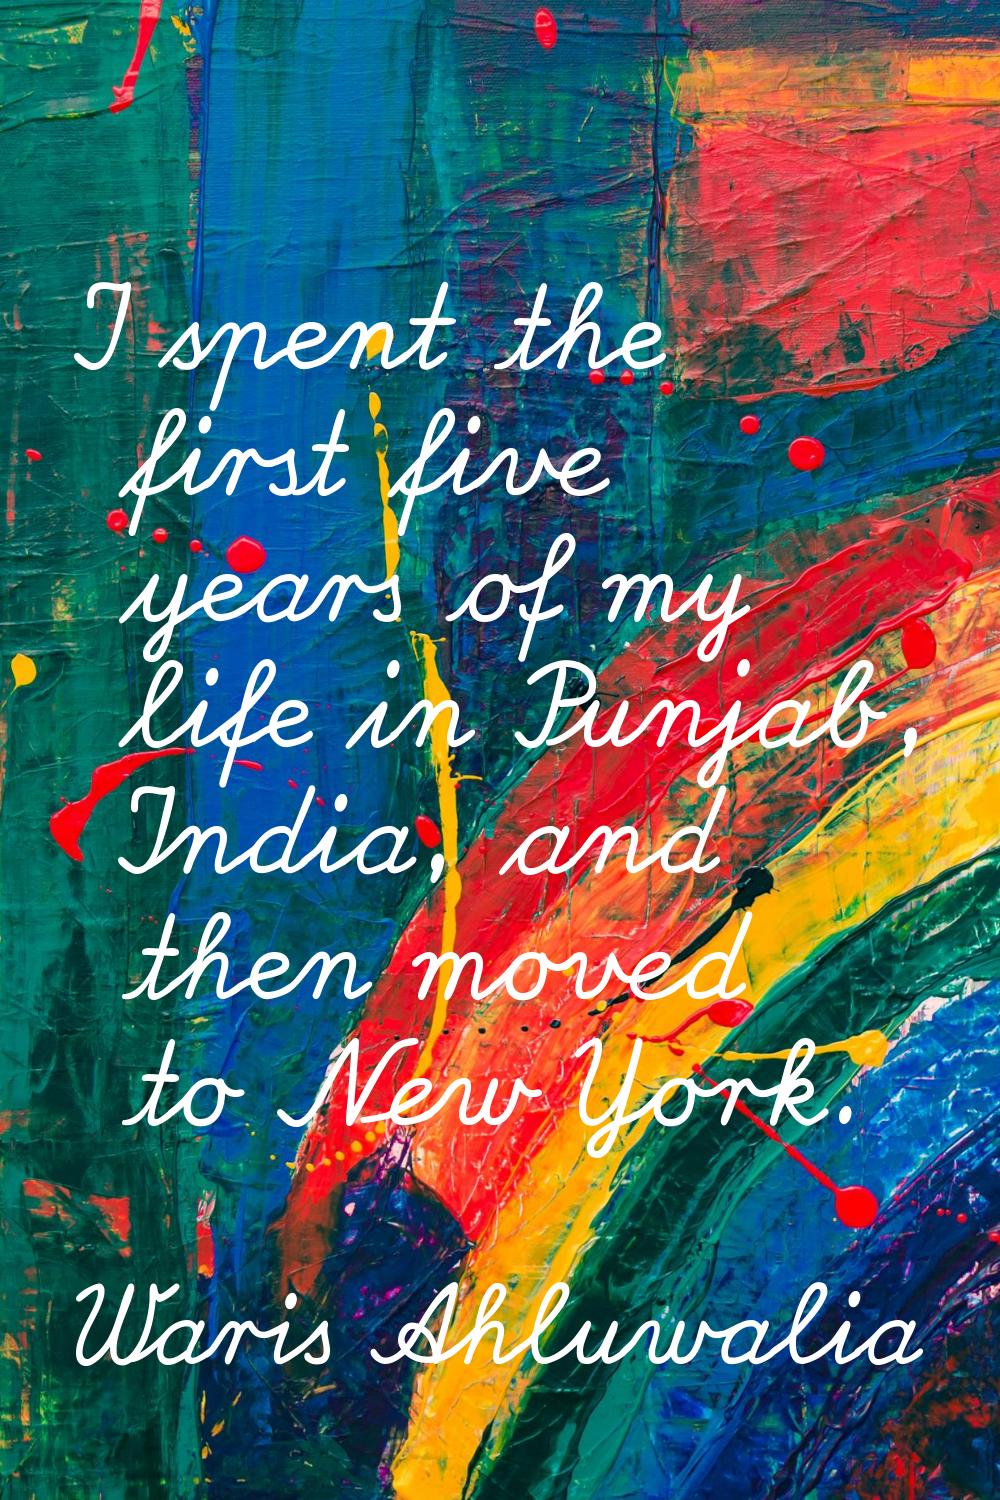 I spent the first five years of my life in Punjab, India, and then moved to New York.